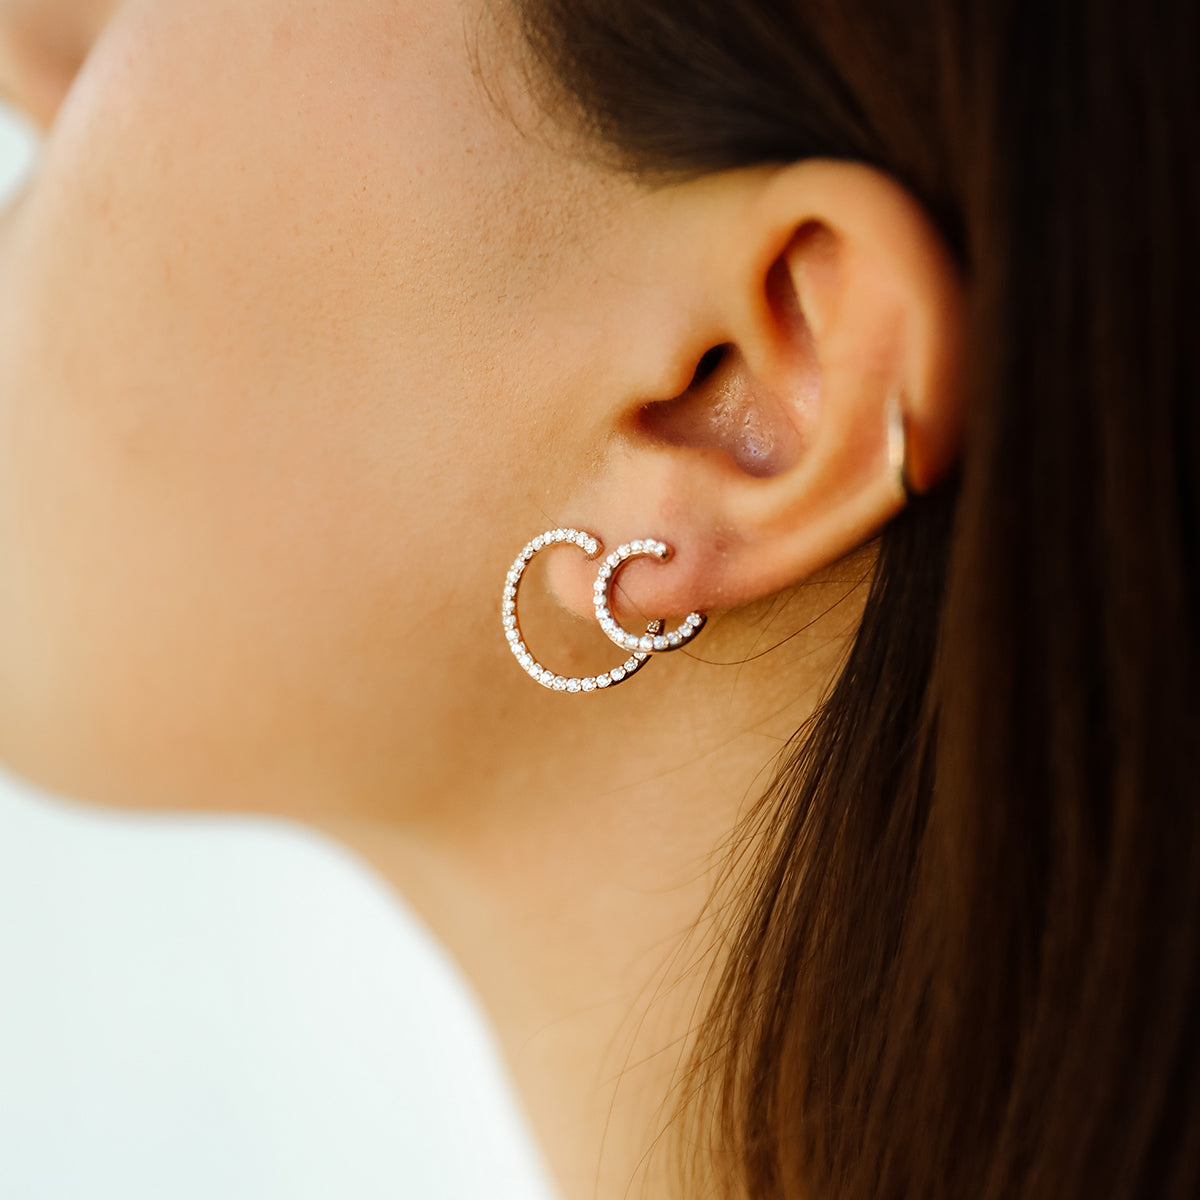 Our Swirl Hoops shown paired with the Mini Swirls Hoops.